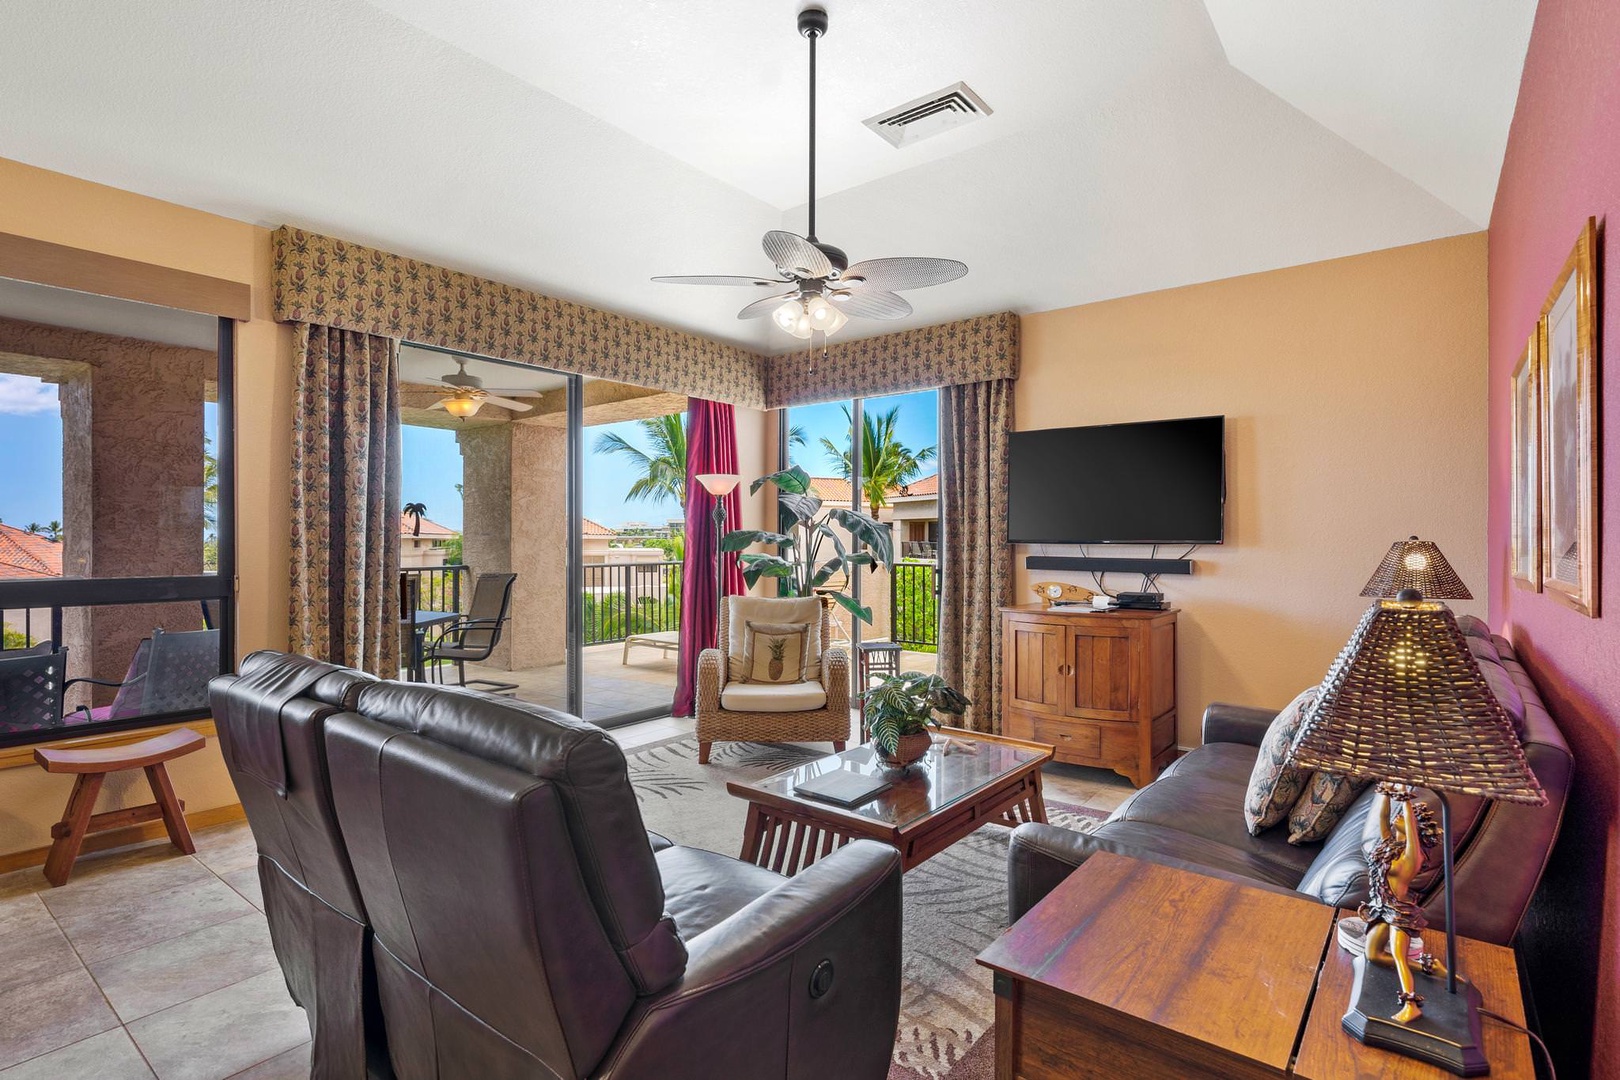 Living room with flat screen TV, comfortable seating and lanai access